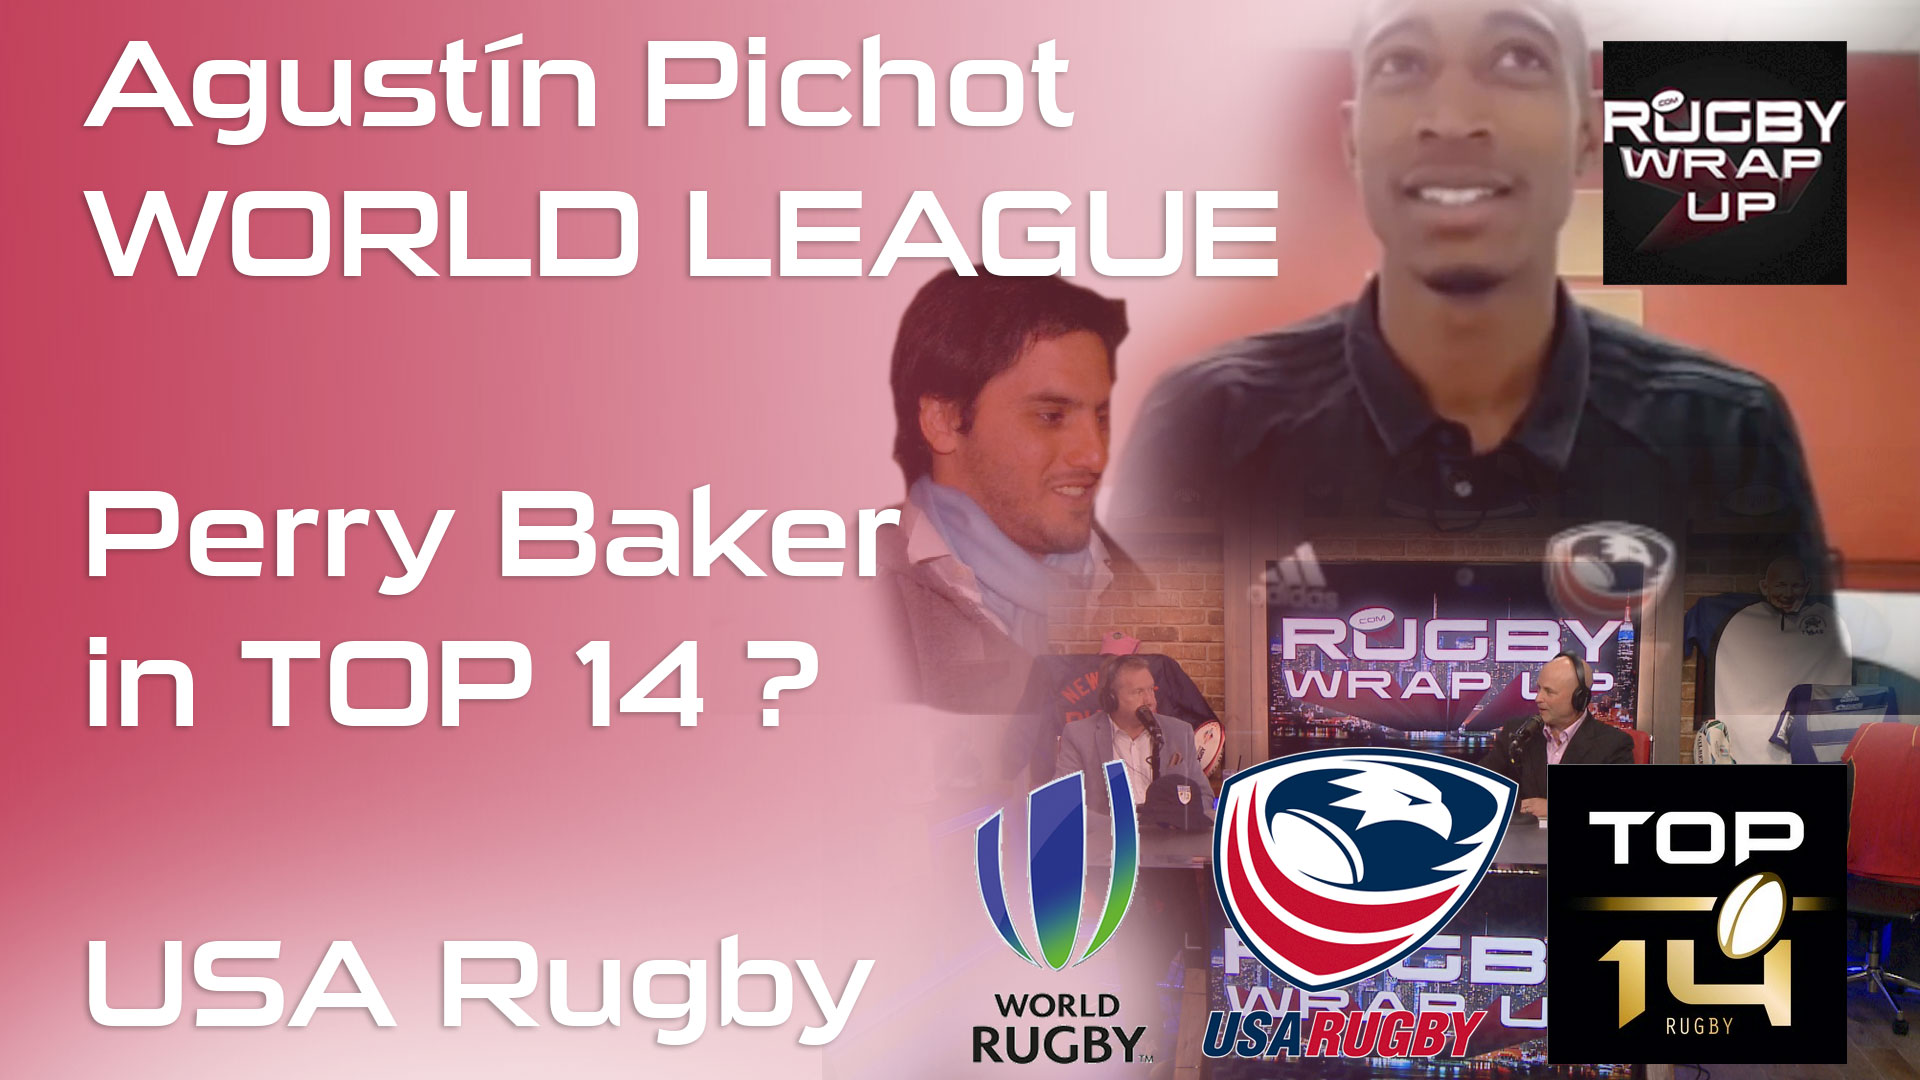 Steve Lewis on USA Rugby Congress, Board, Agustín Pichot WORLD LEAGUE, Perry Baker in TOP 14